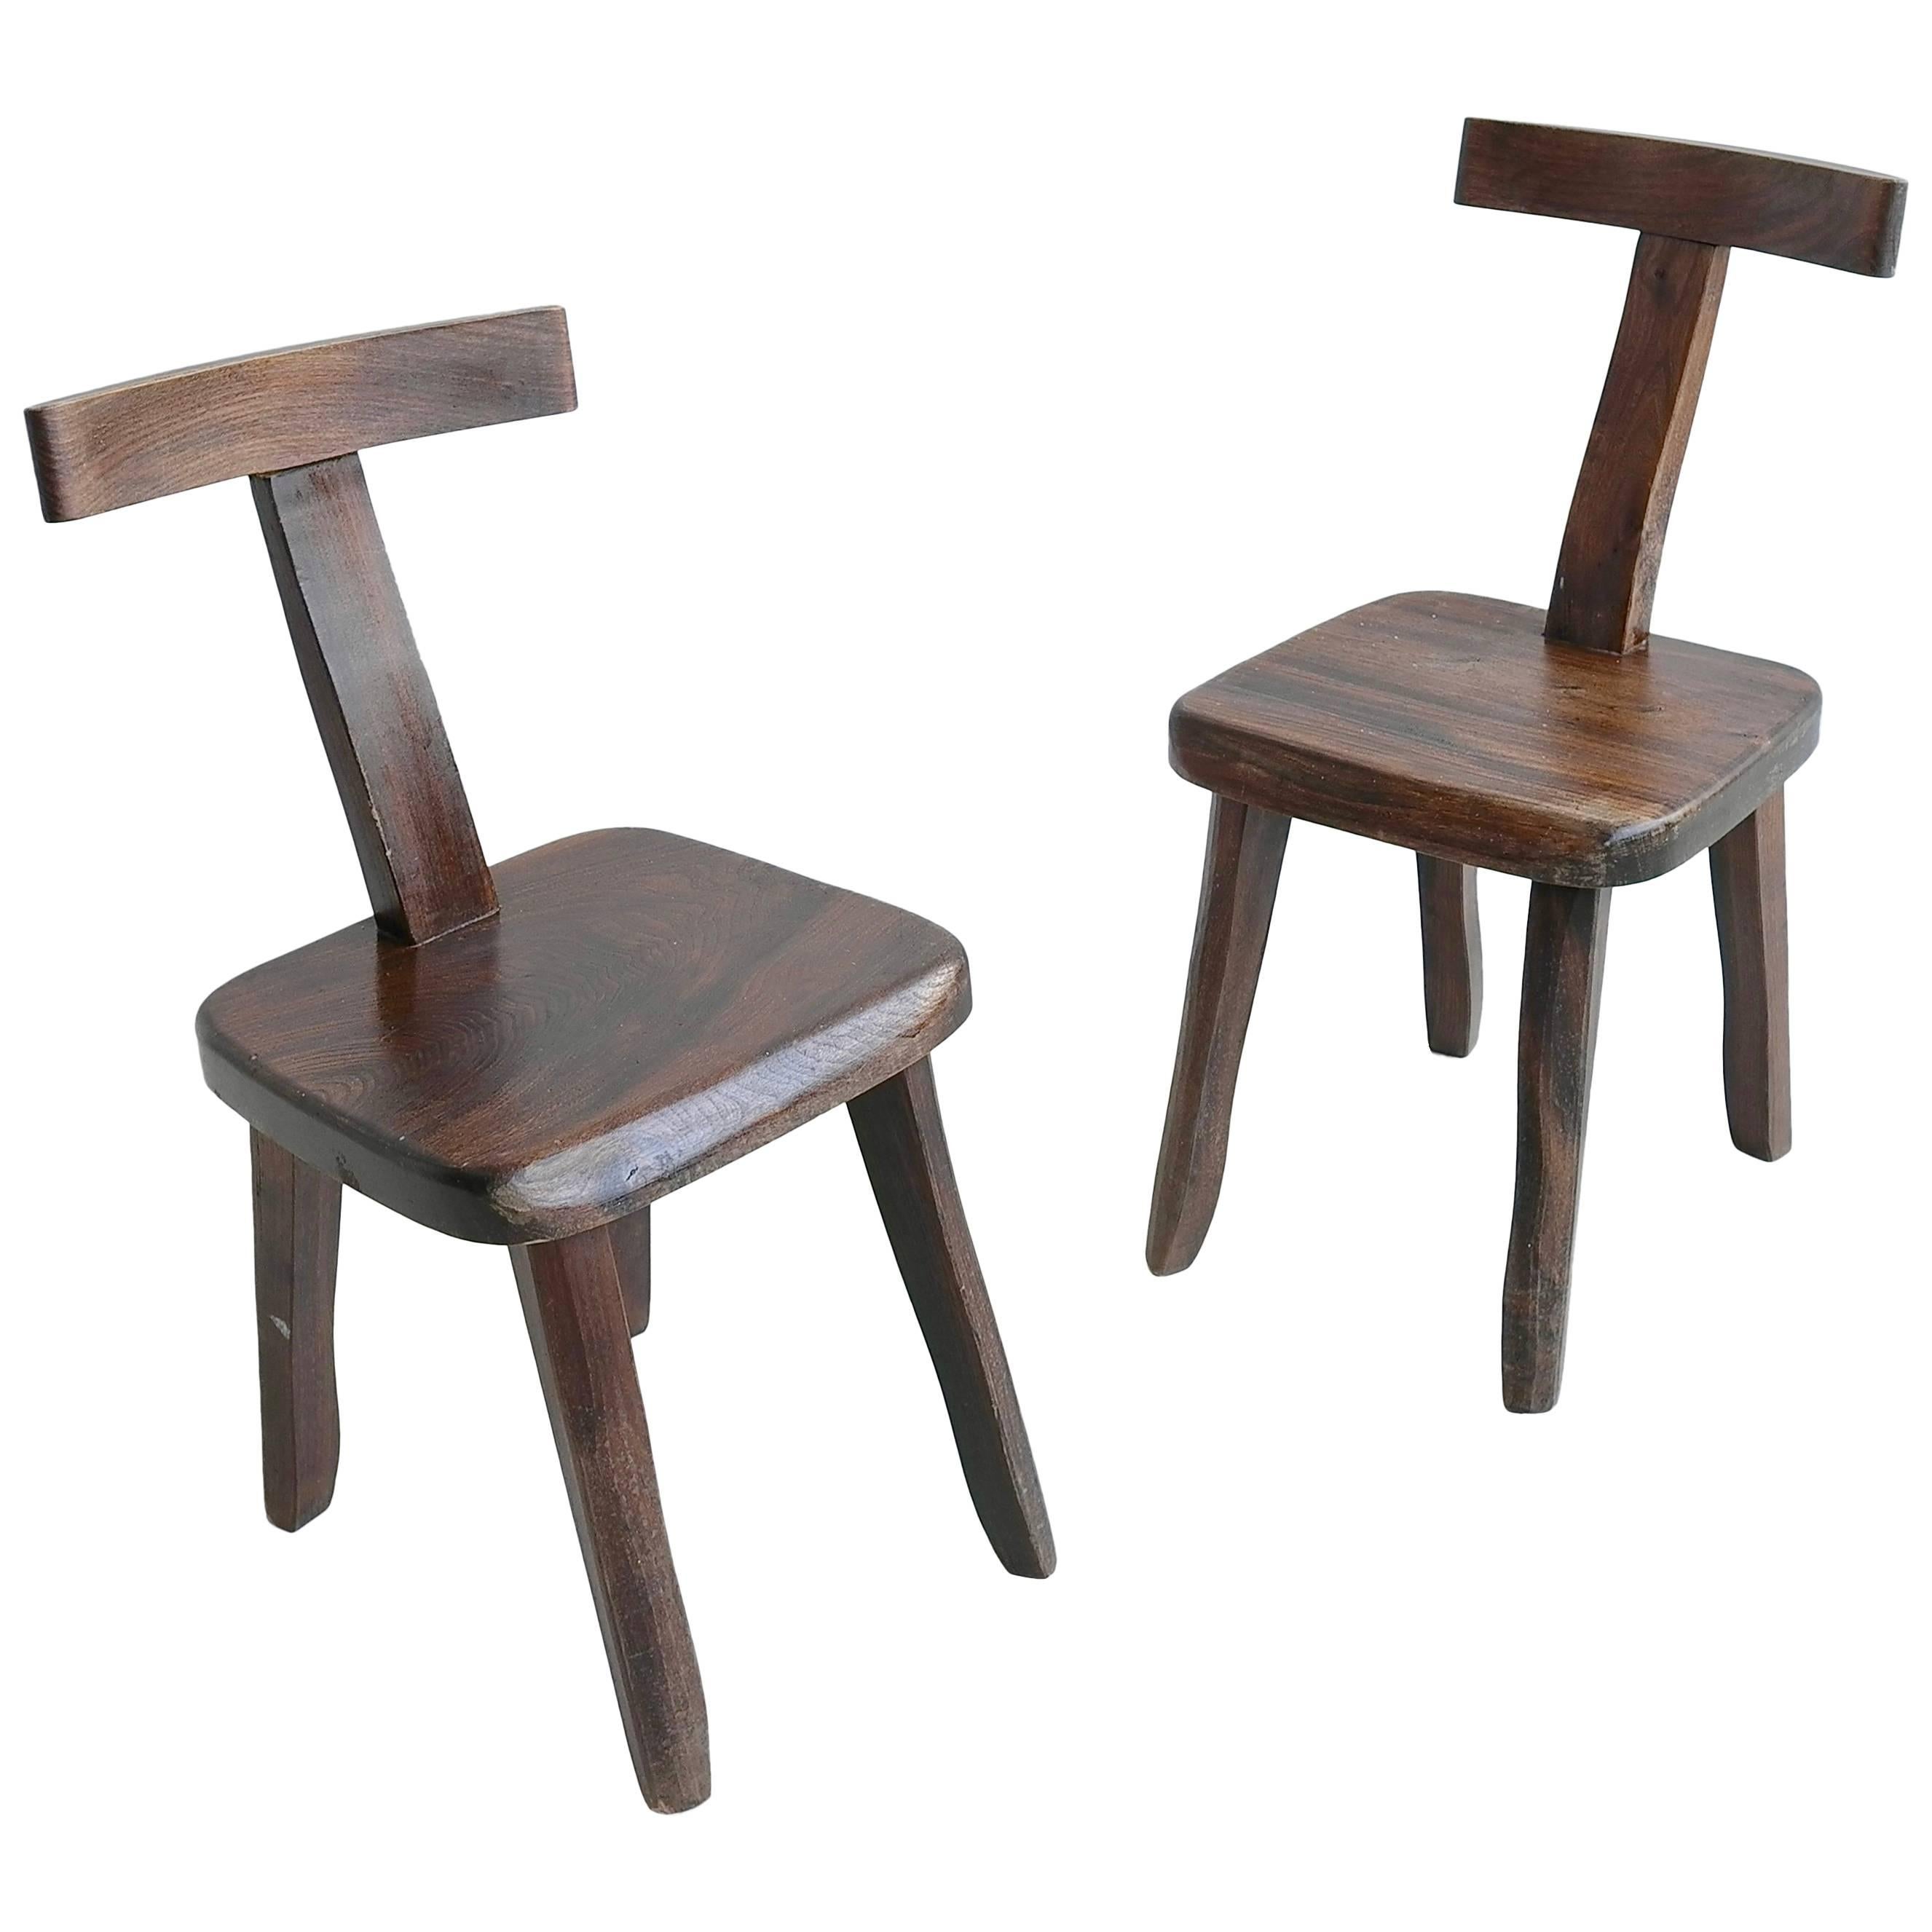 Pair of Chairs by Olavi Hanninen for by Mikko Nupponen, Finland, 1950s